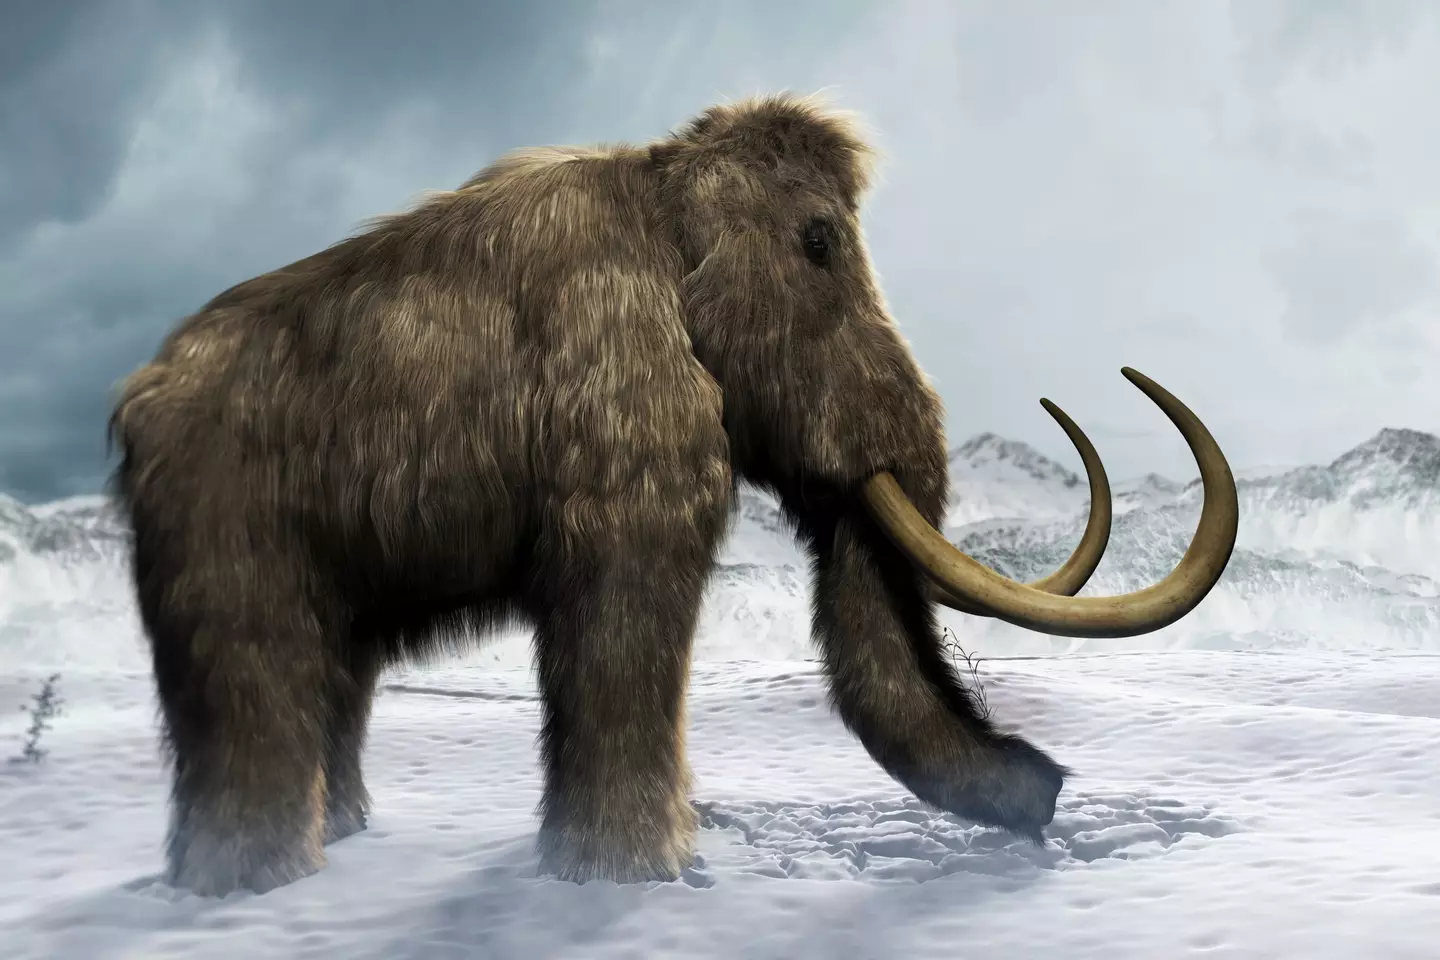 Wooly mammoth.